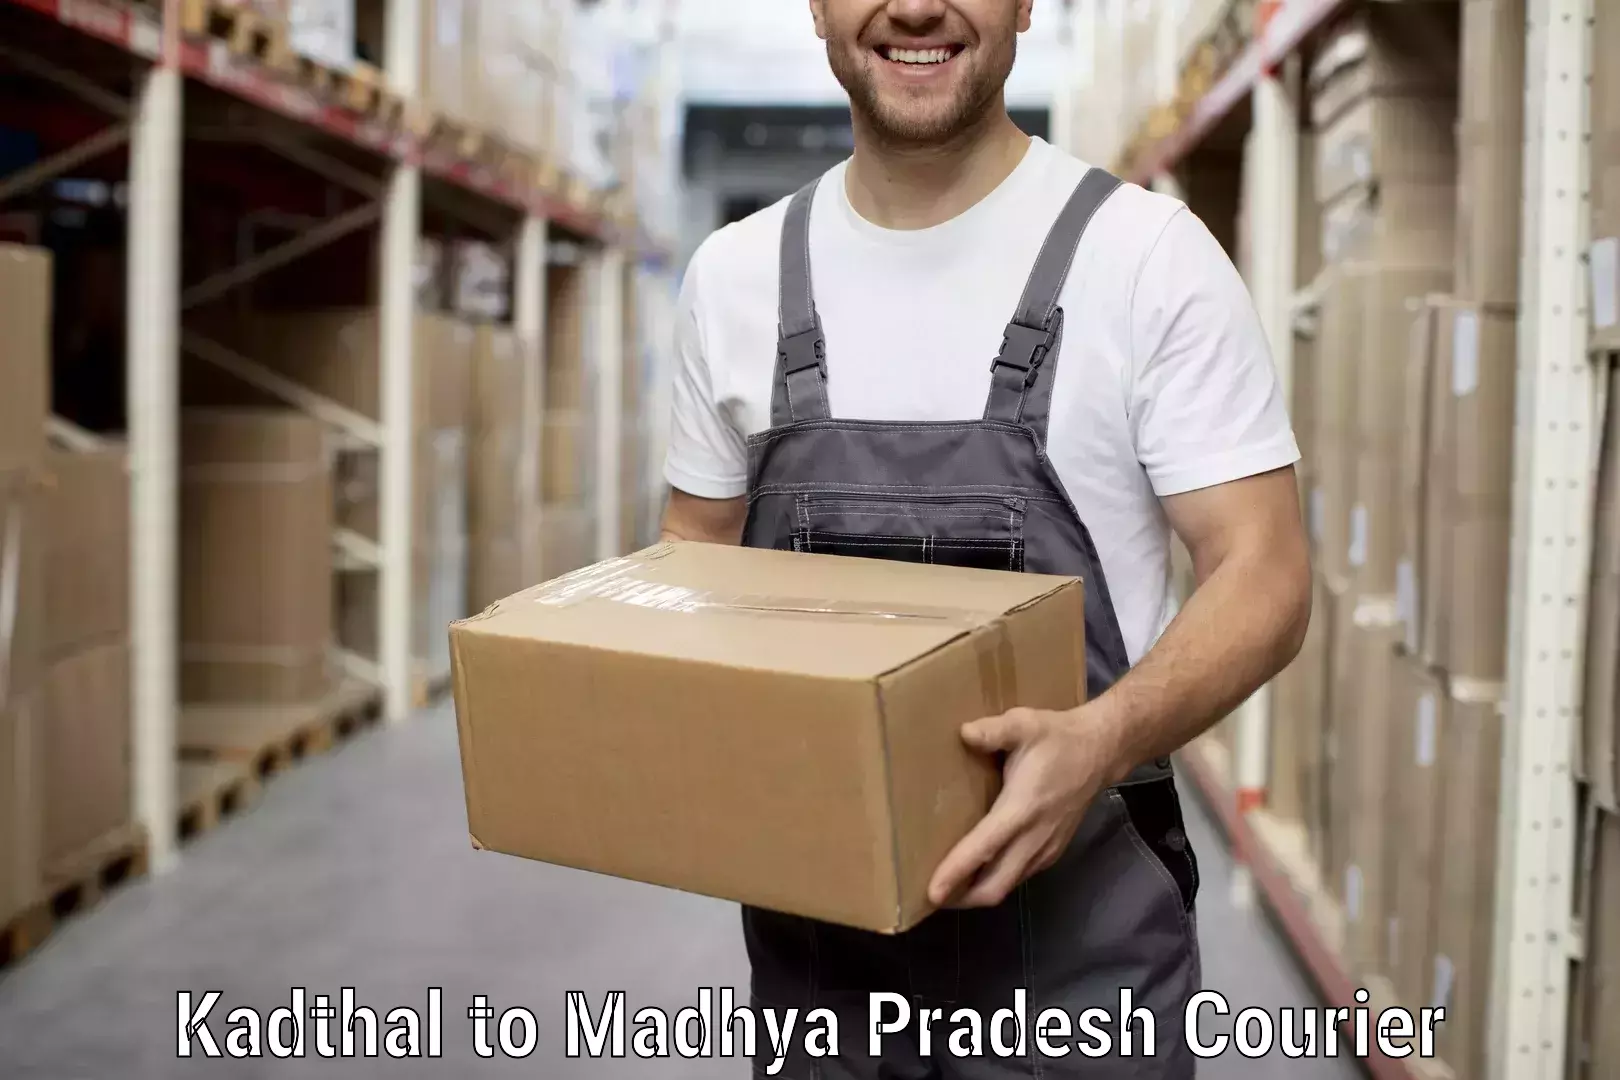 Trusted relocation experts Kadthal to Chanderi